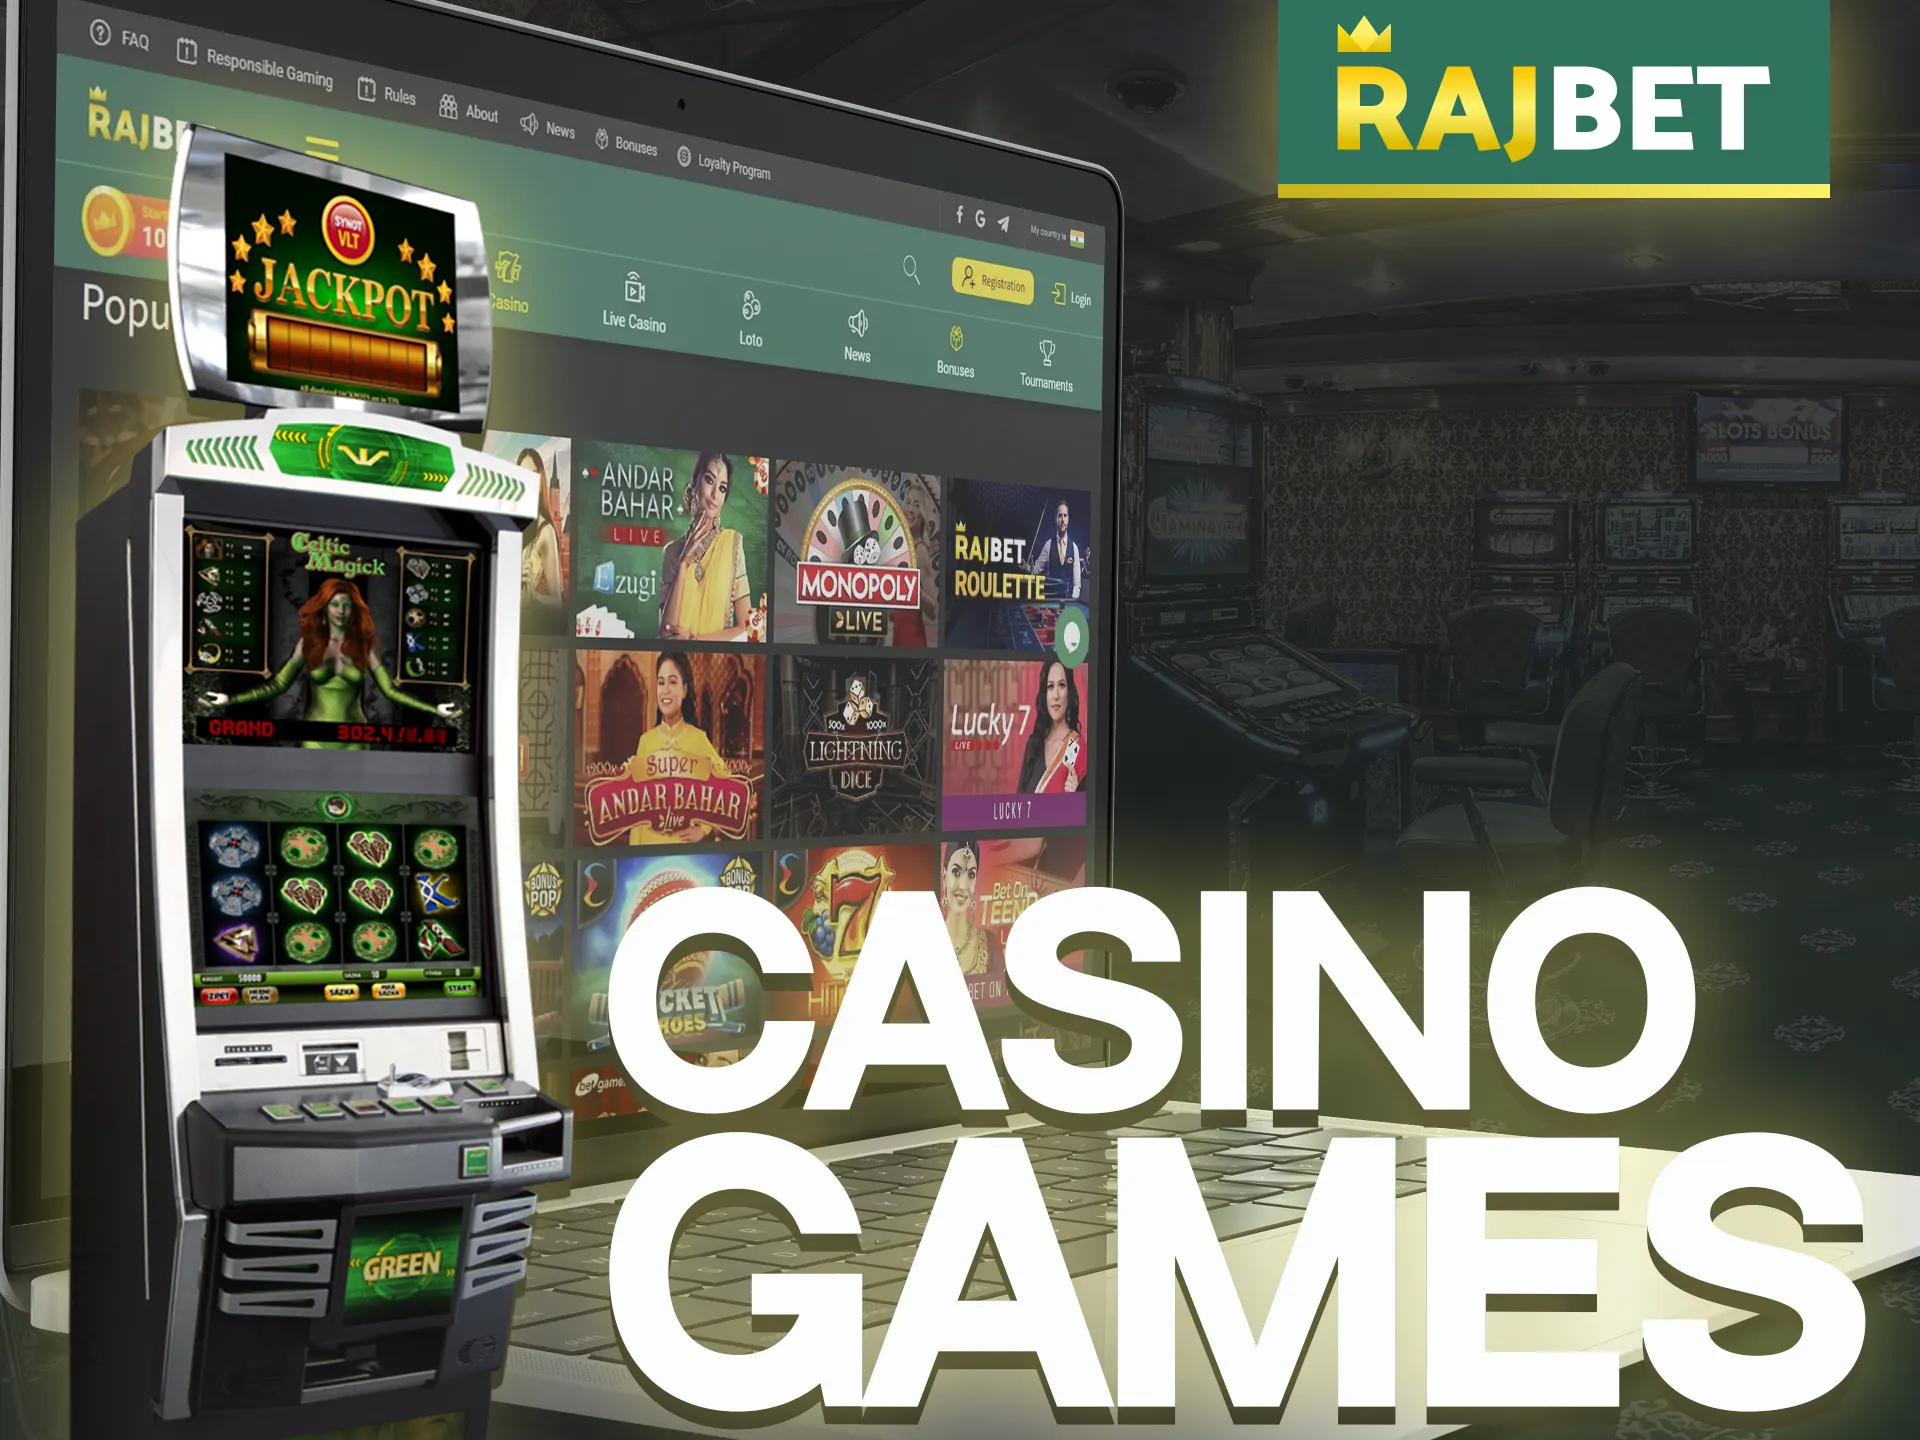 Rajbet Casino features more than 2,000 games from leading software providers.